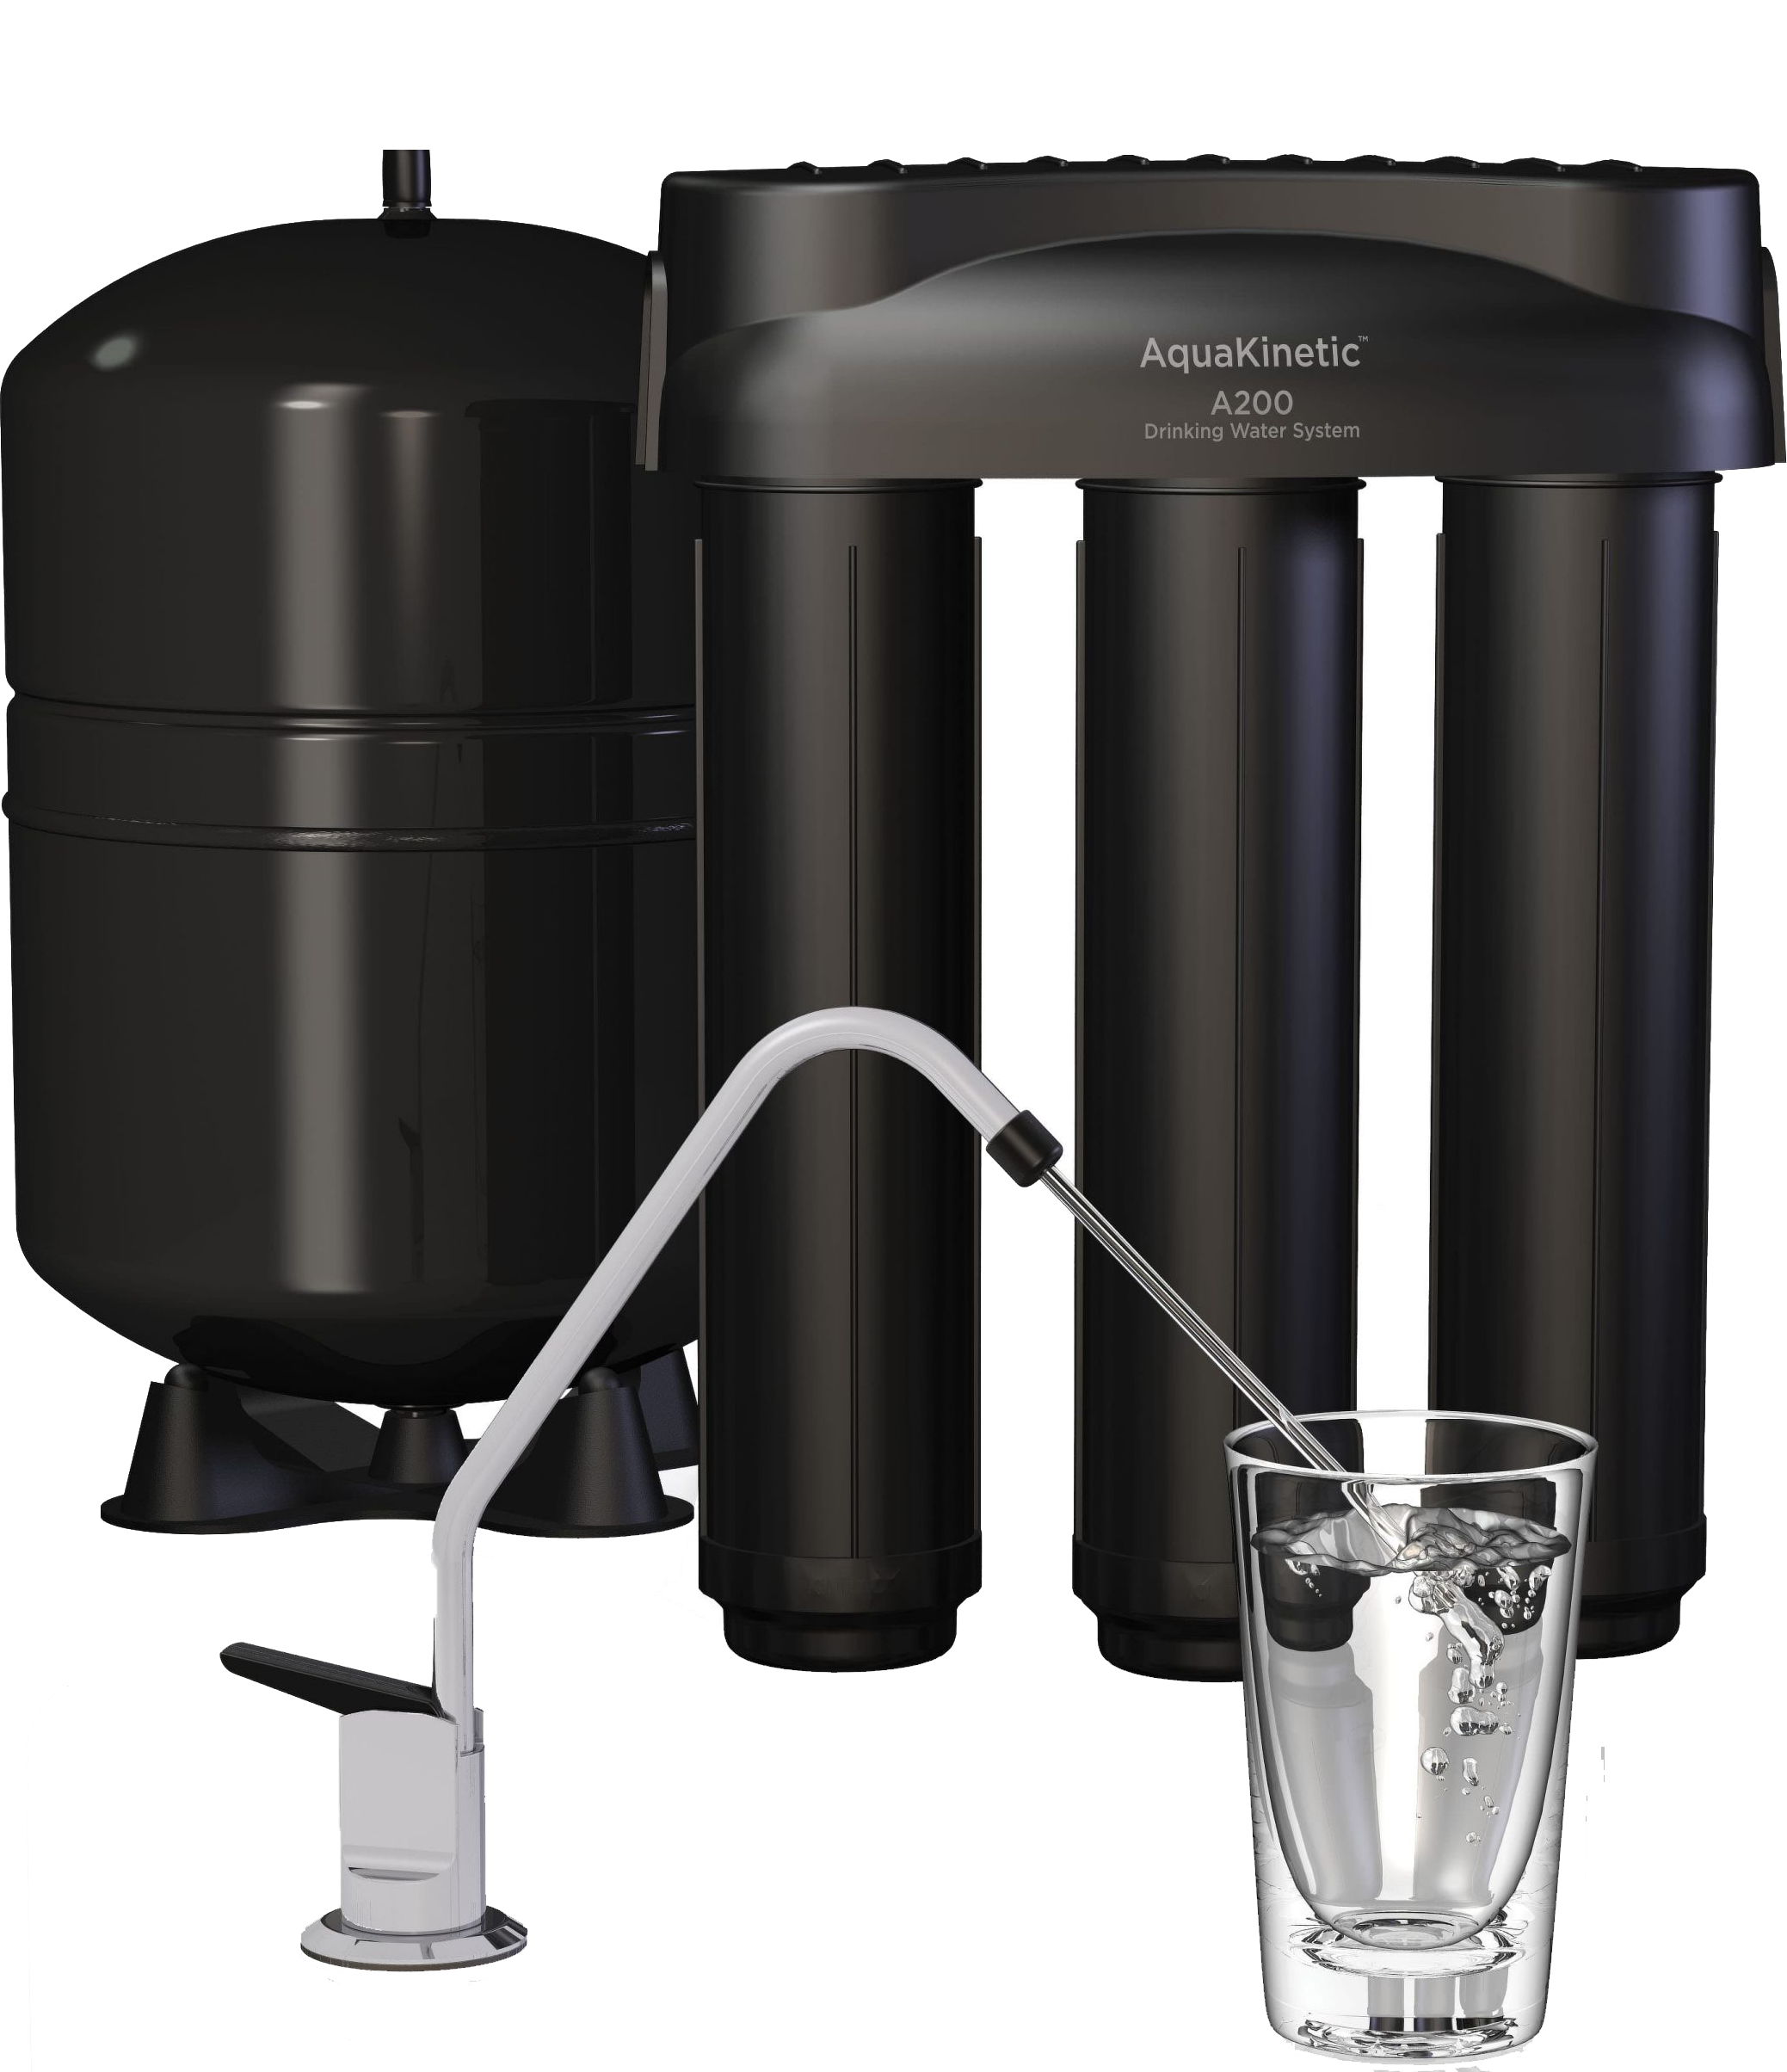 AquaKinetic A100 Drinking Water System - Kinetico